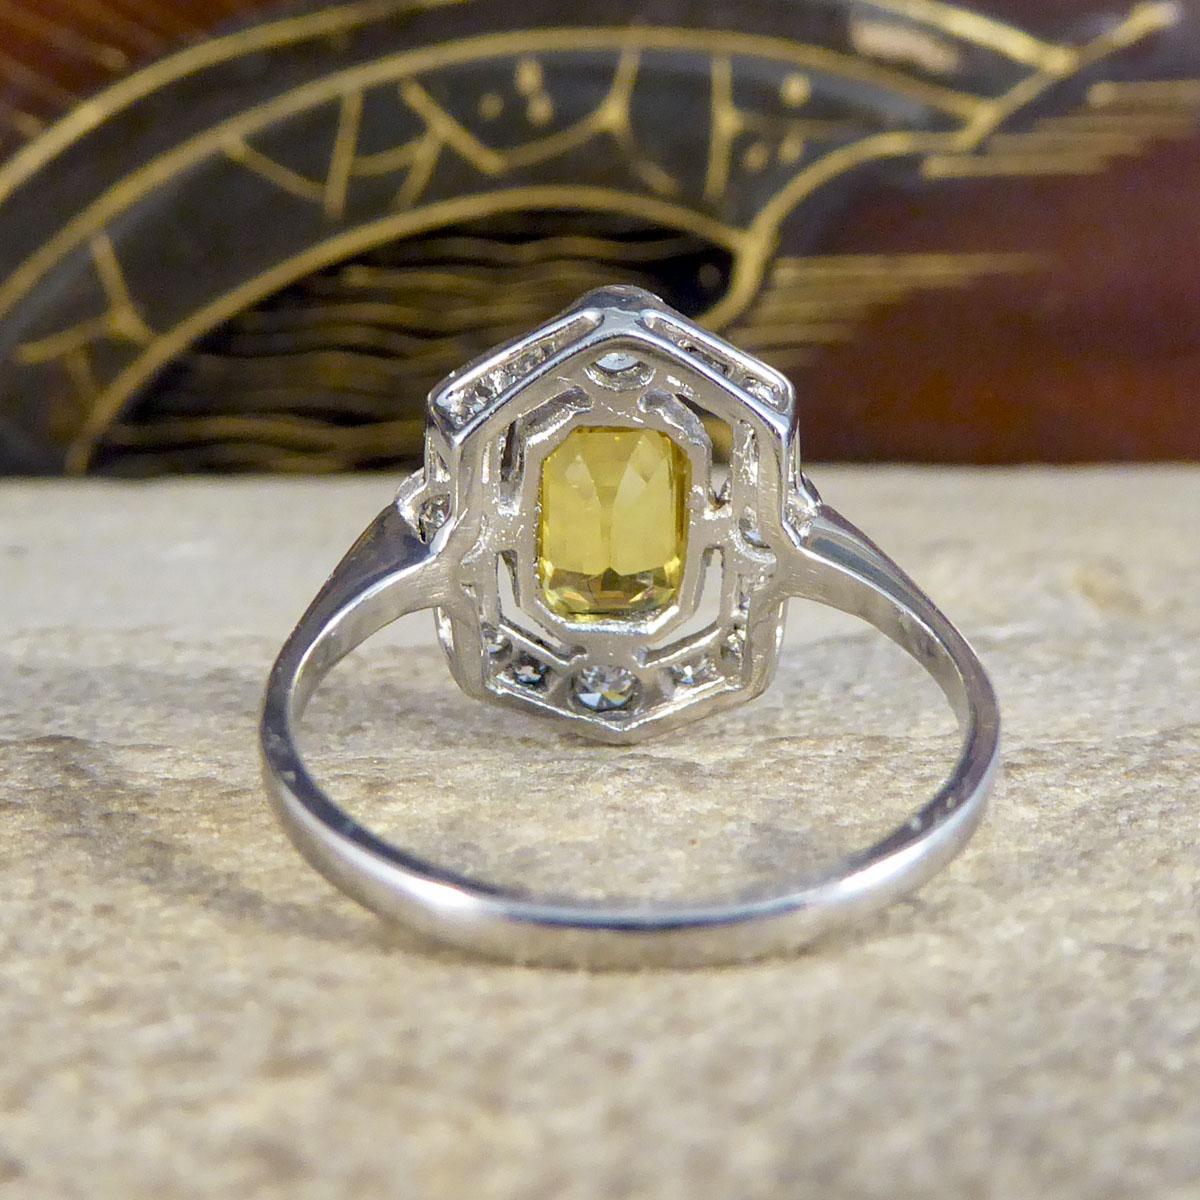 Emerald Cut Art Deco Style 1.25ct Yellow Sapphire and Diamond Halo Ring in Platinum